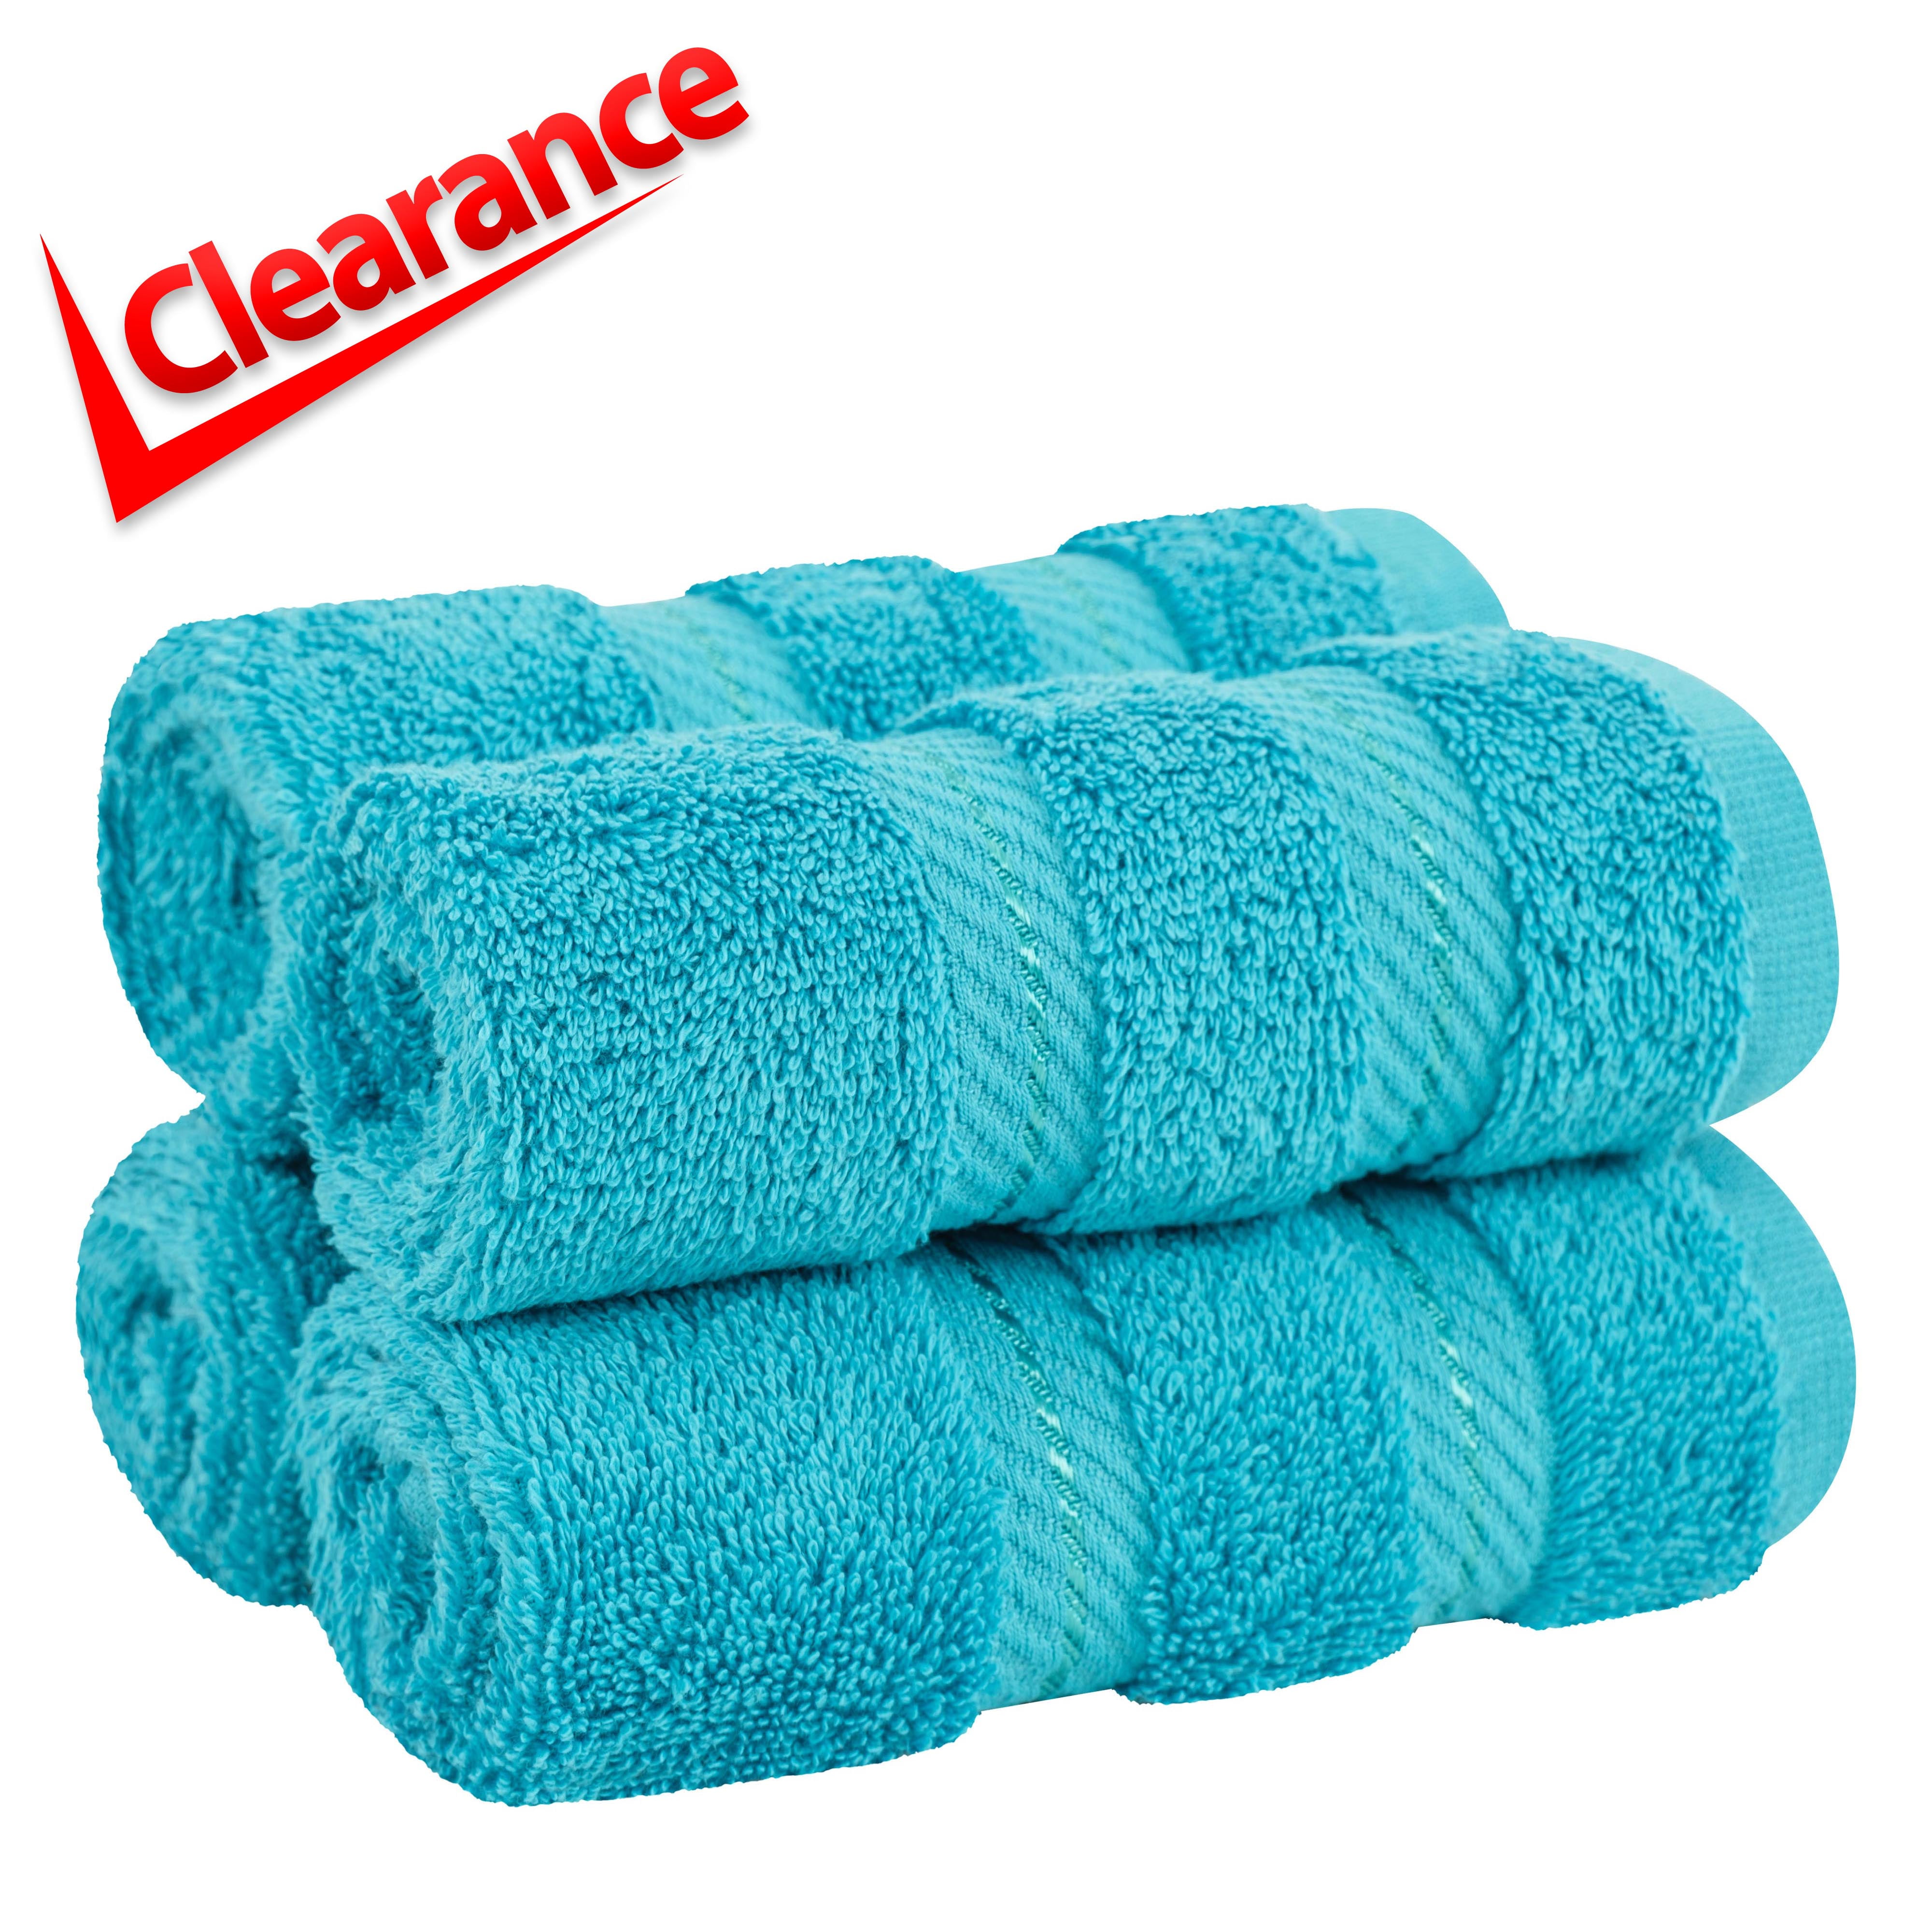 Turkish Hand Towels for Bathroom Set of 4 - 20 x 40 inches